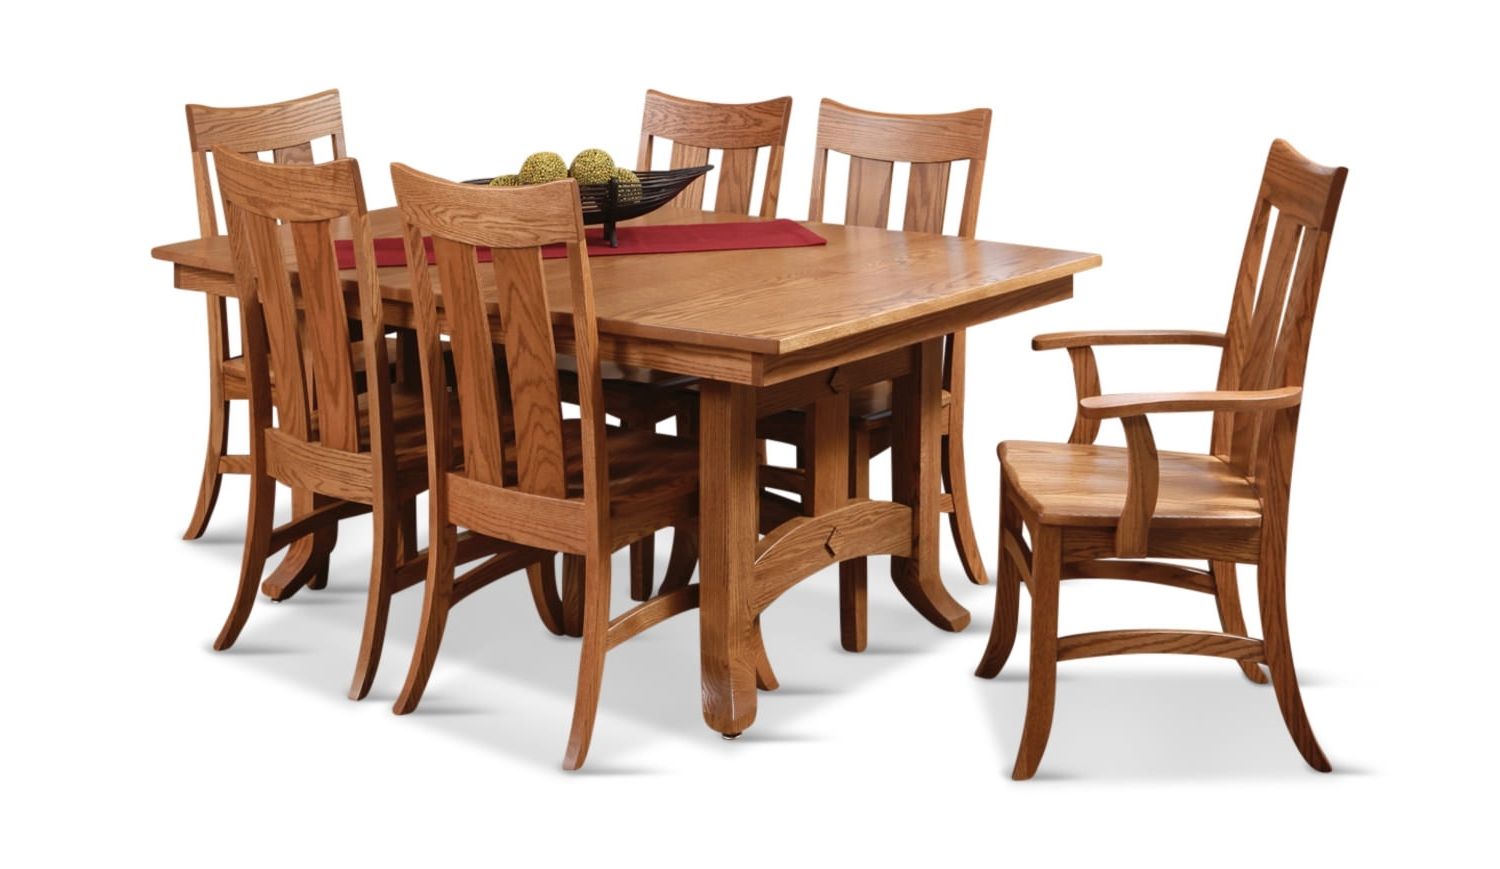 Preferred Biltmore Oak Trestle Table With 4 Side Chairs And 2 Arm Chairs (View 7 of 20)